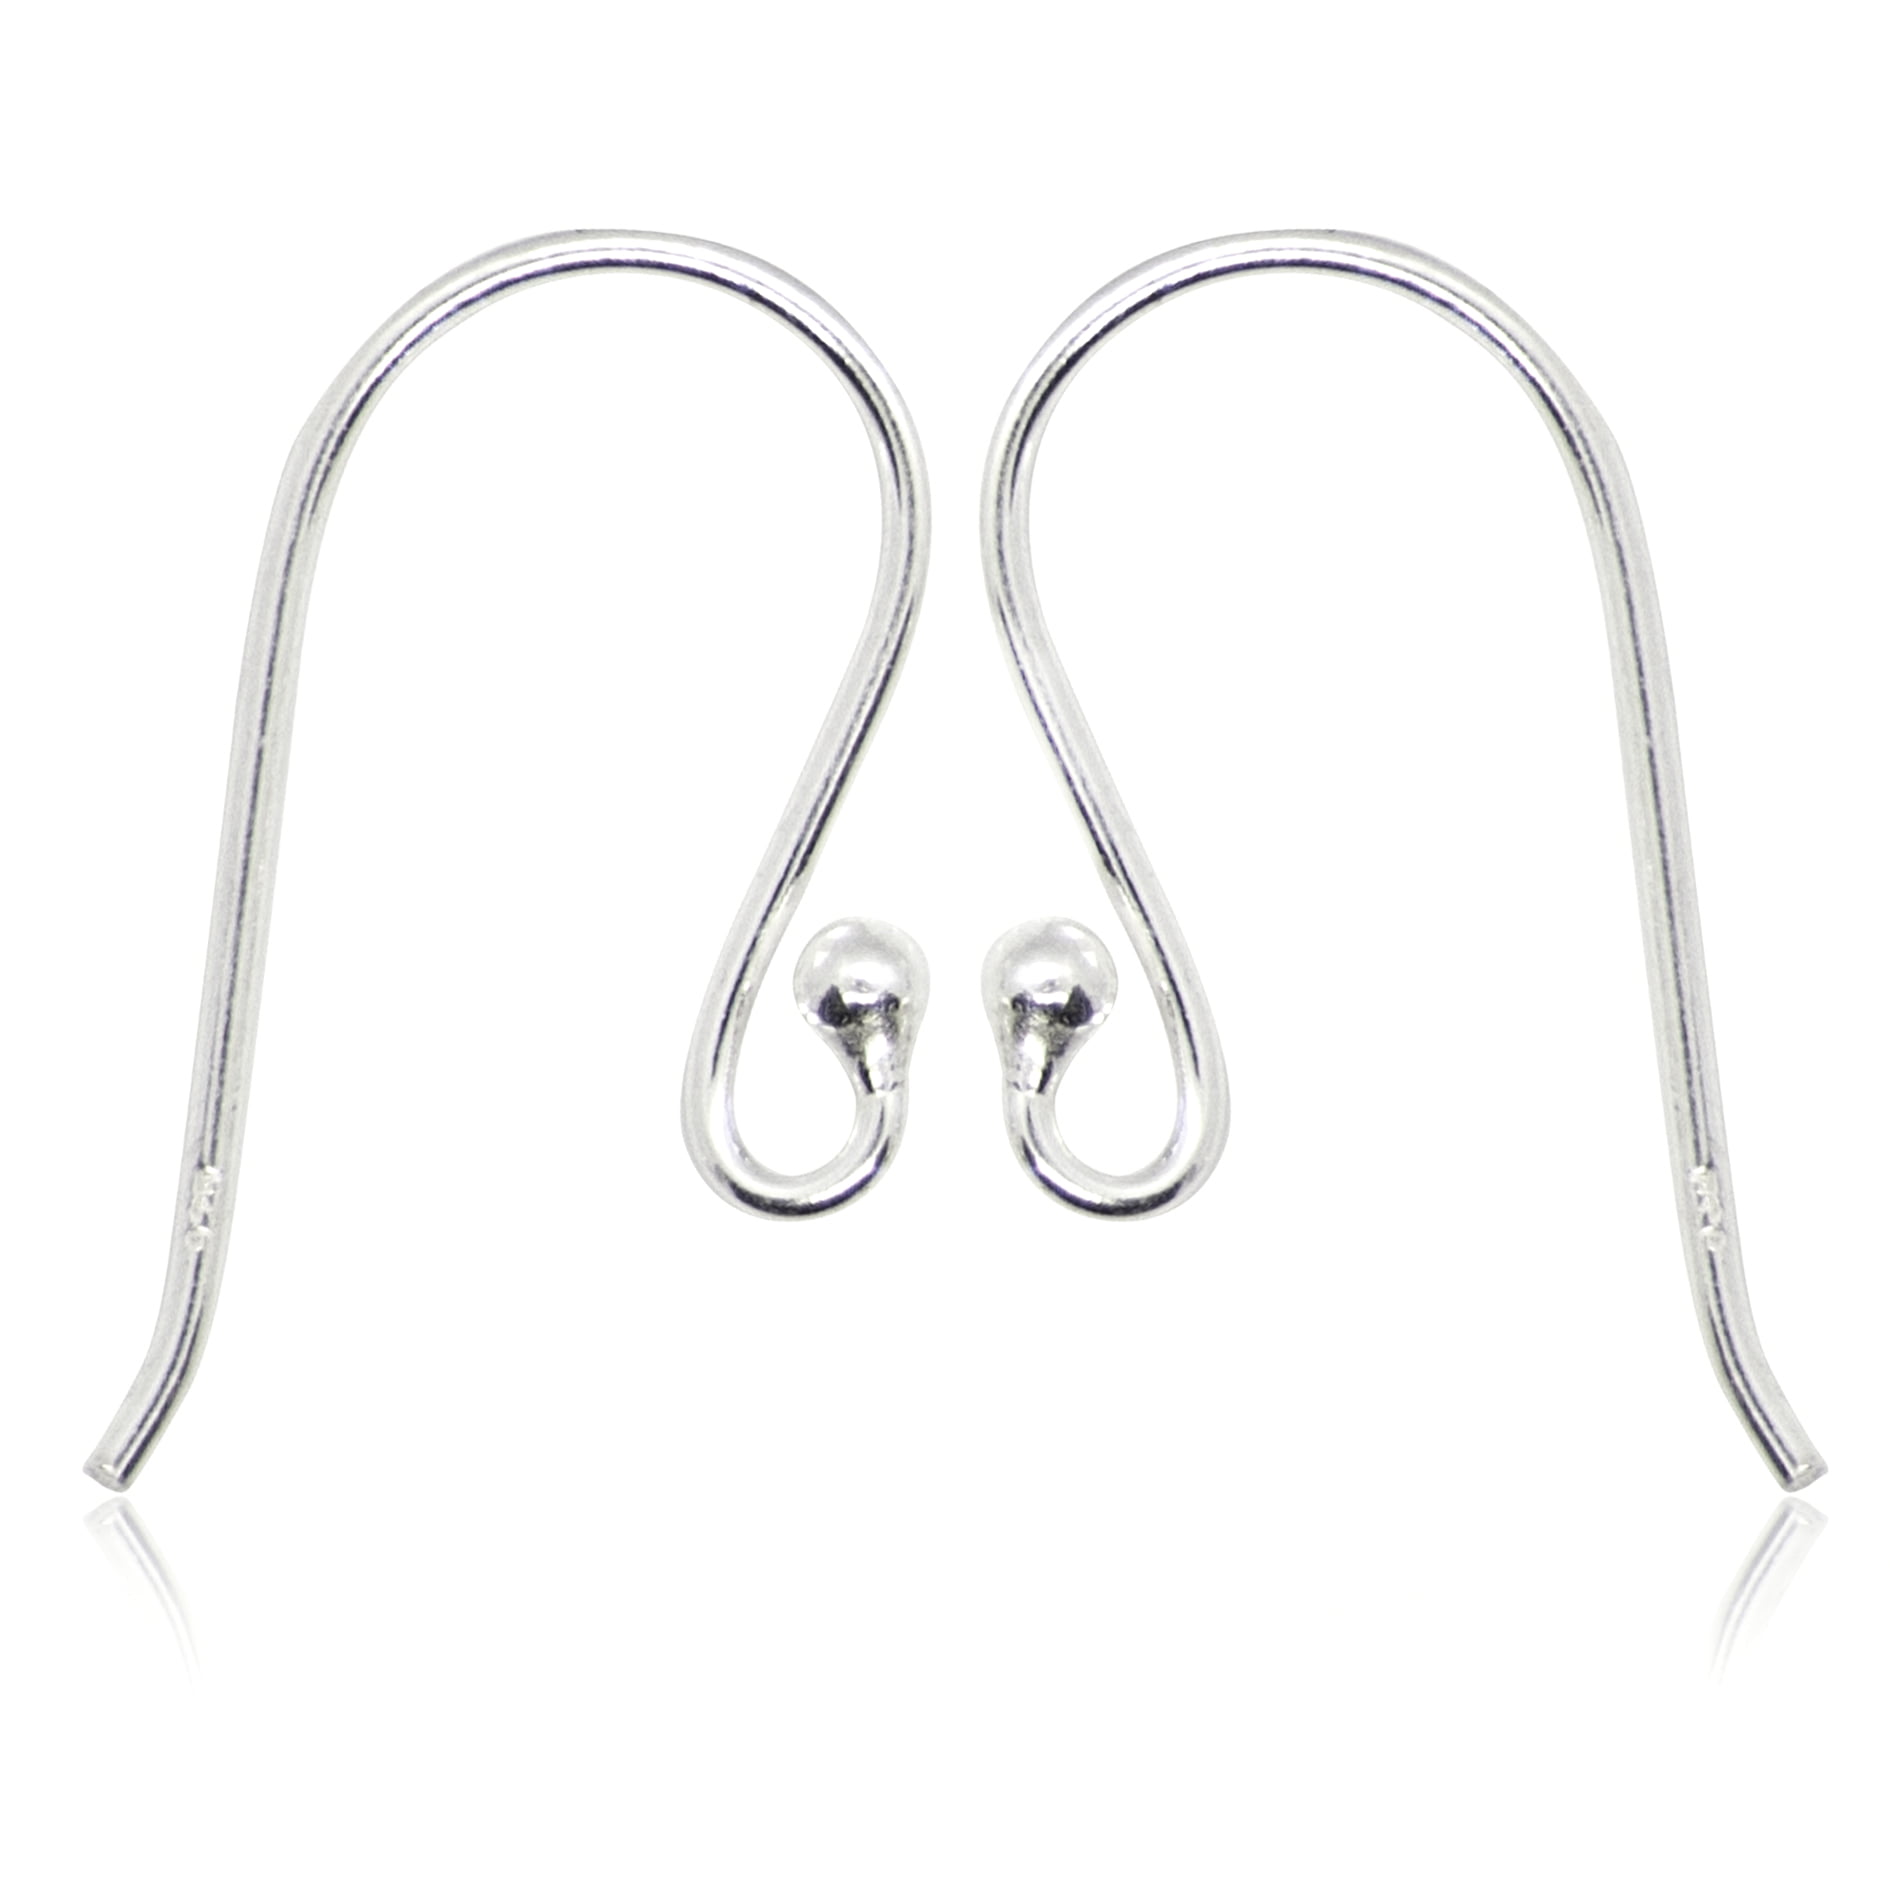 TOAOB 8pcs 925 Sterling Silver Leverback French Earring Hooks  Hypoallergenic Dangle Earwire Findings 16x9mm with Jump Rings for Jewelry  Making